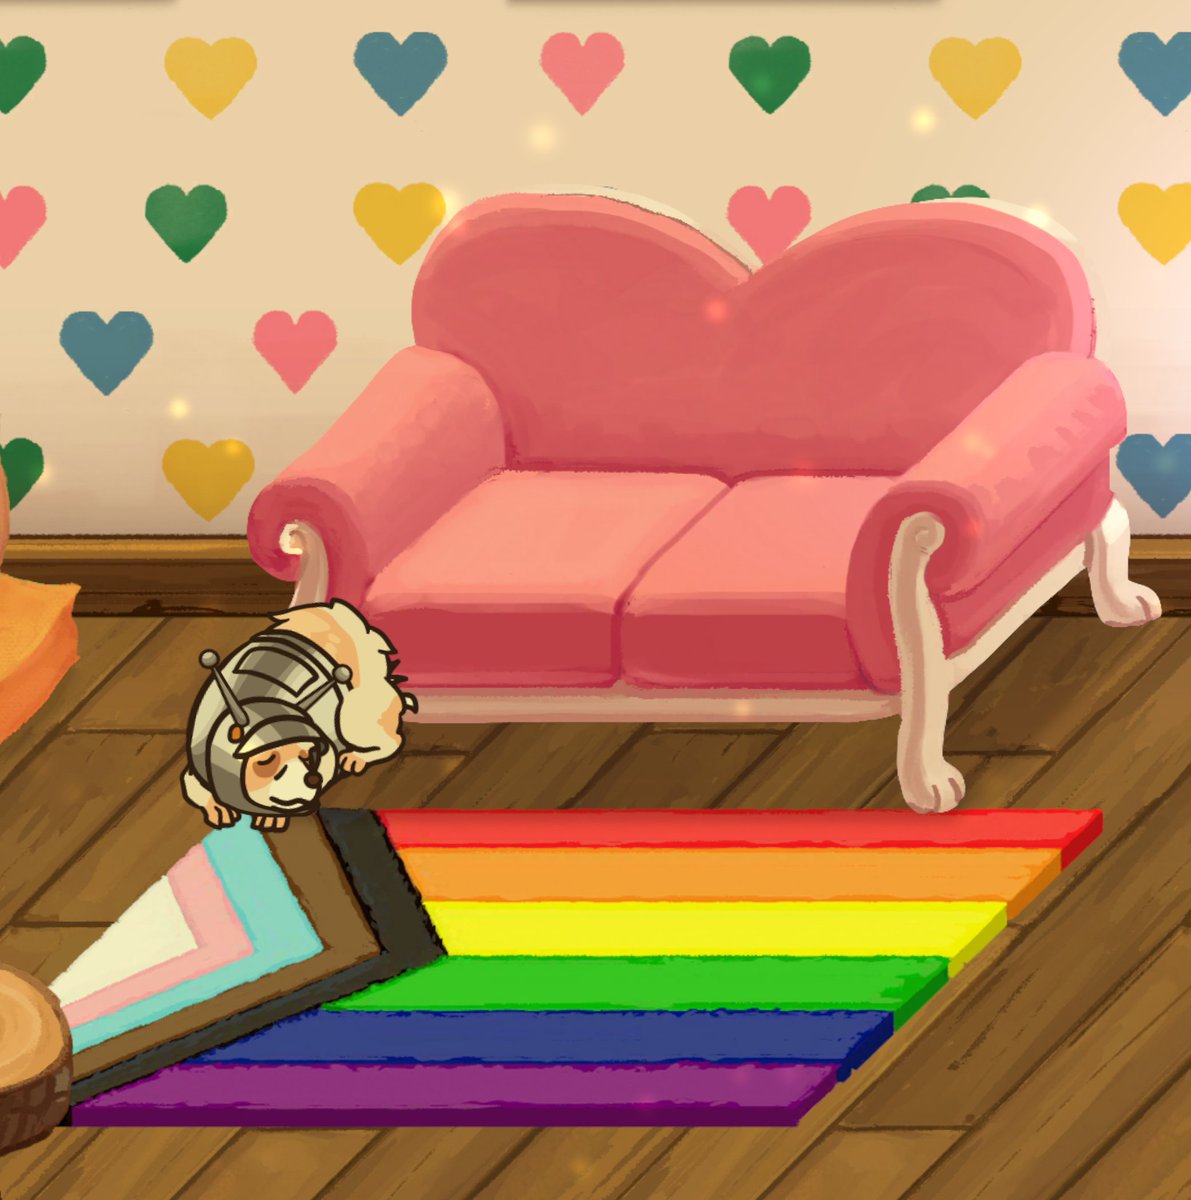 ✨🏳️‍🌈 Pride flag rug! 🏳️‍🌈 ✨

To get the rug, go into ur barket, scroll to the bottom, and type in 'PRIDE2022' in the 'claim COUPON CODES here!' section💖